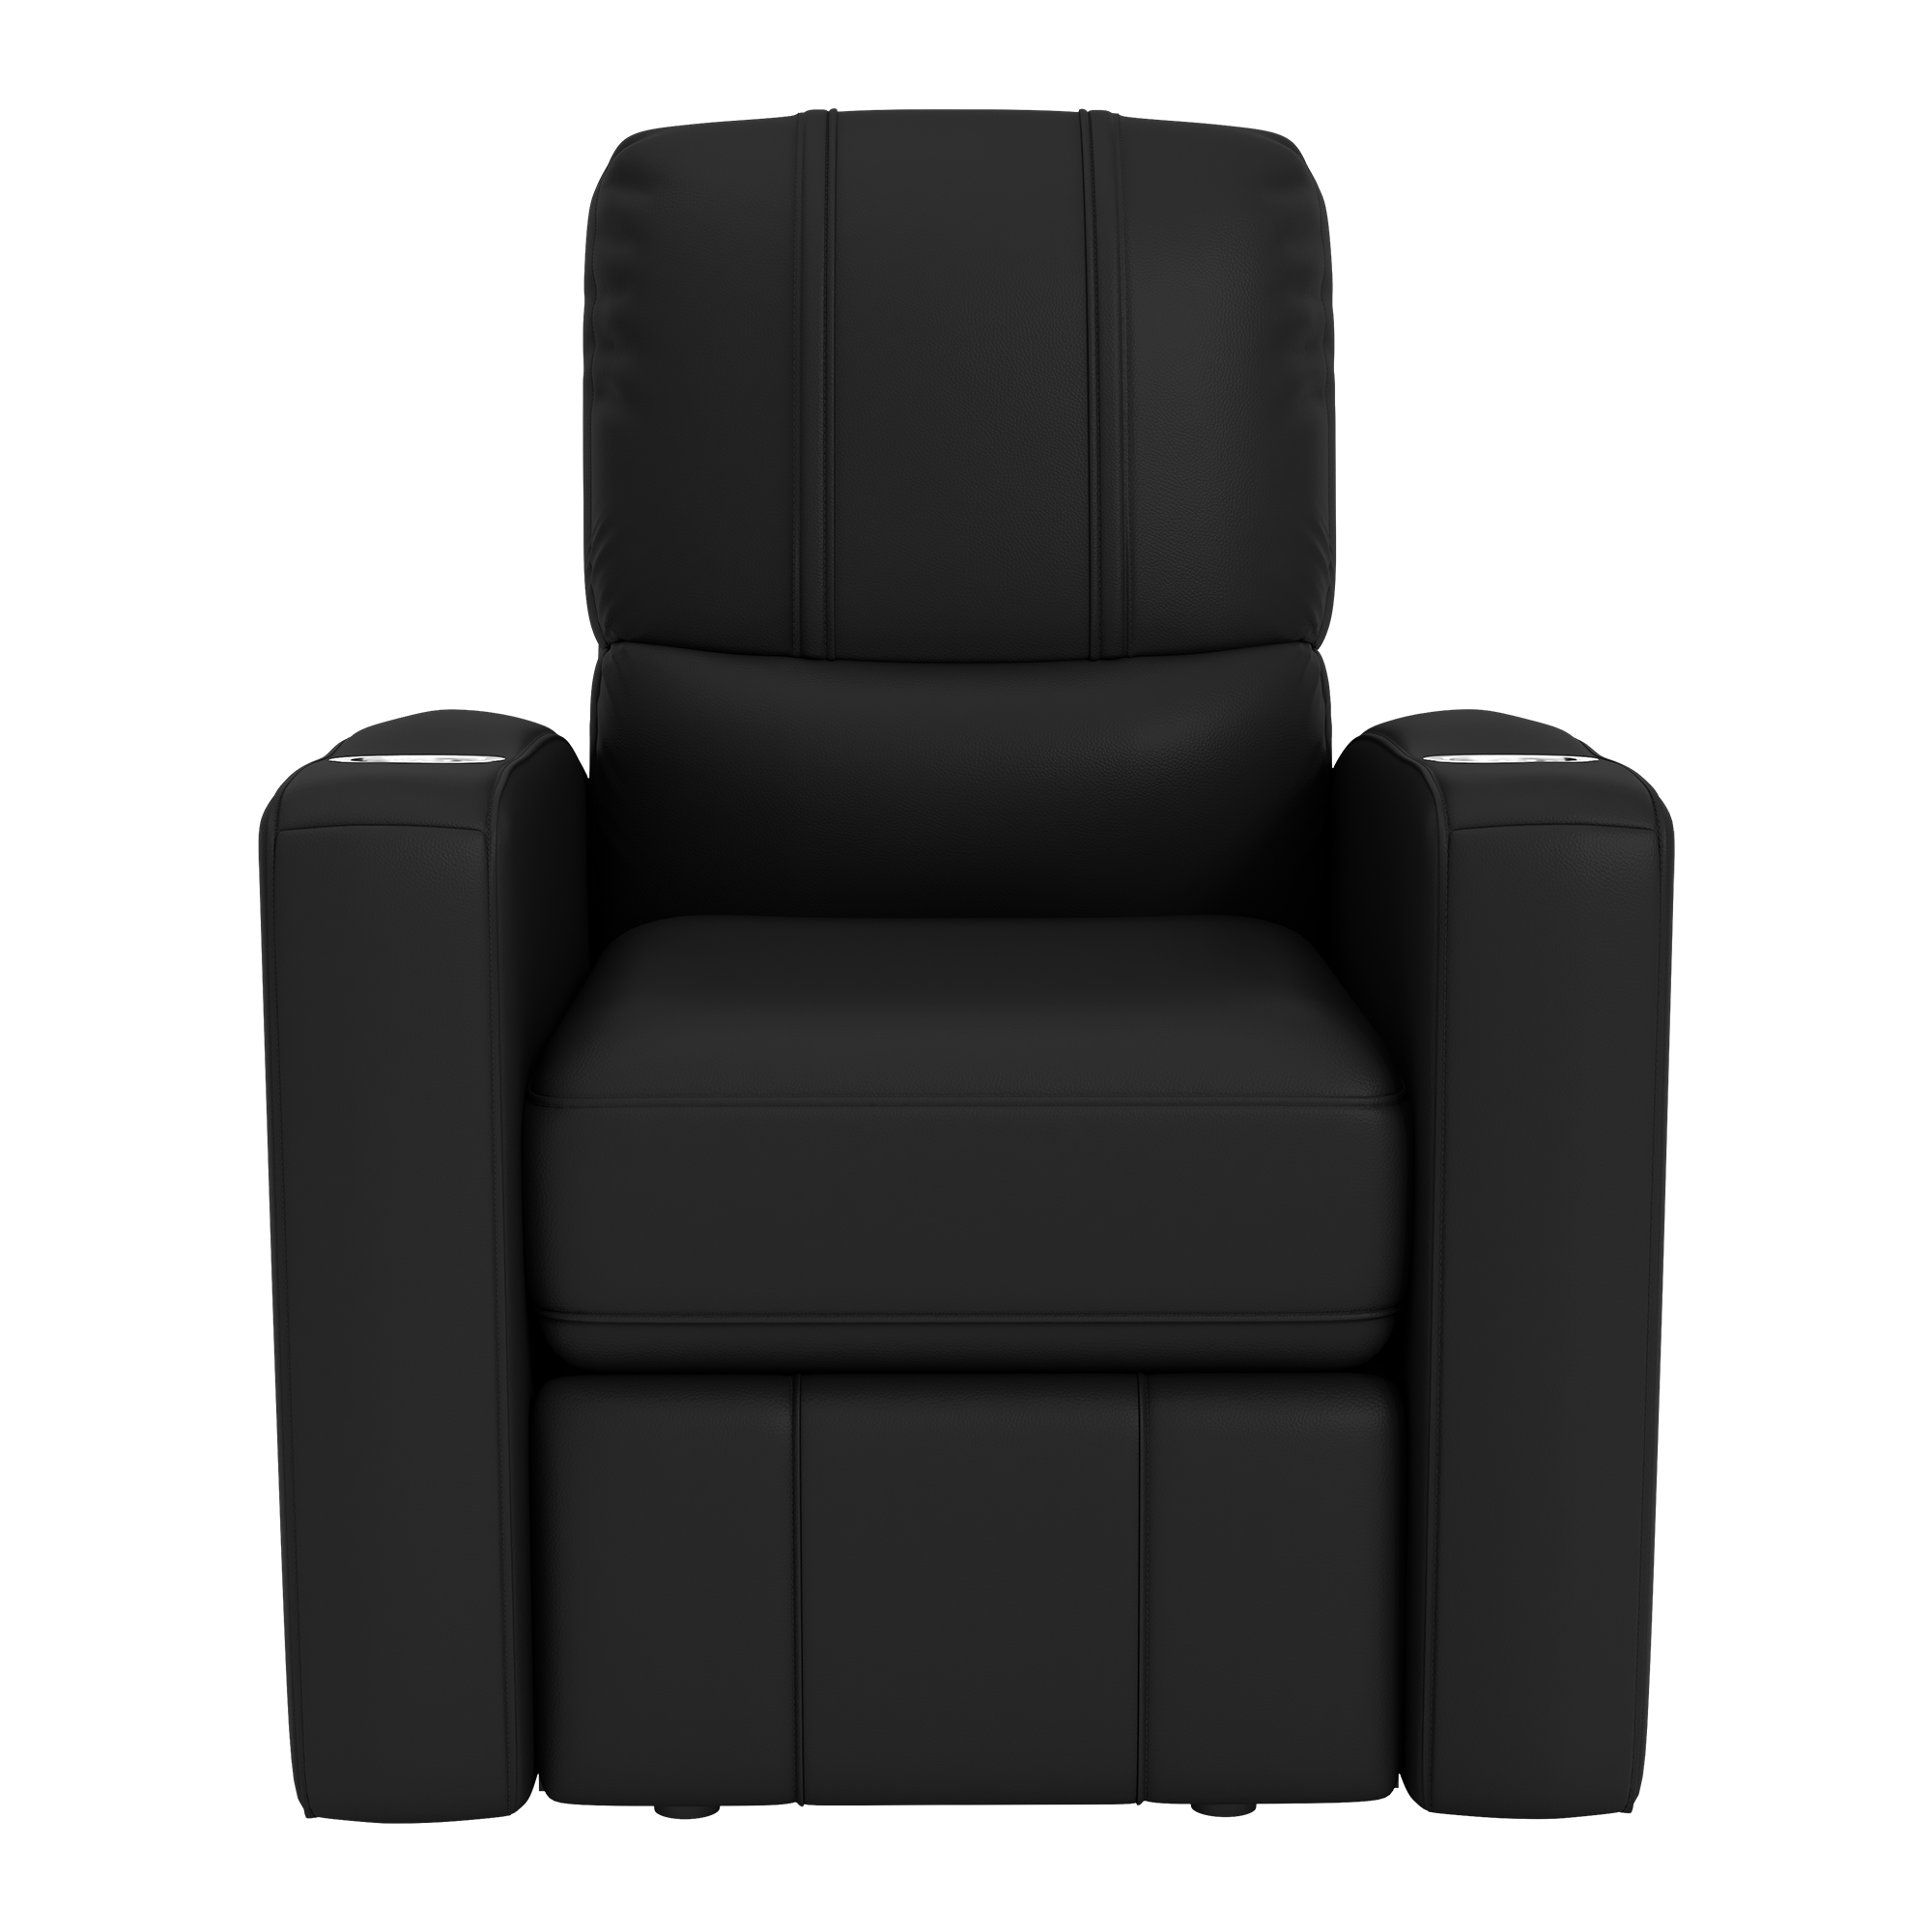 Stealth Recliner with Tampa Bay Rays Cooperstown Primary